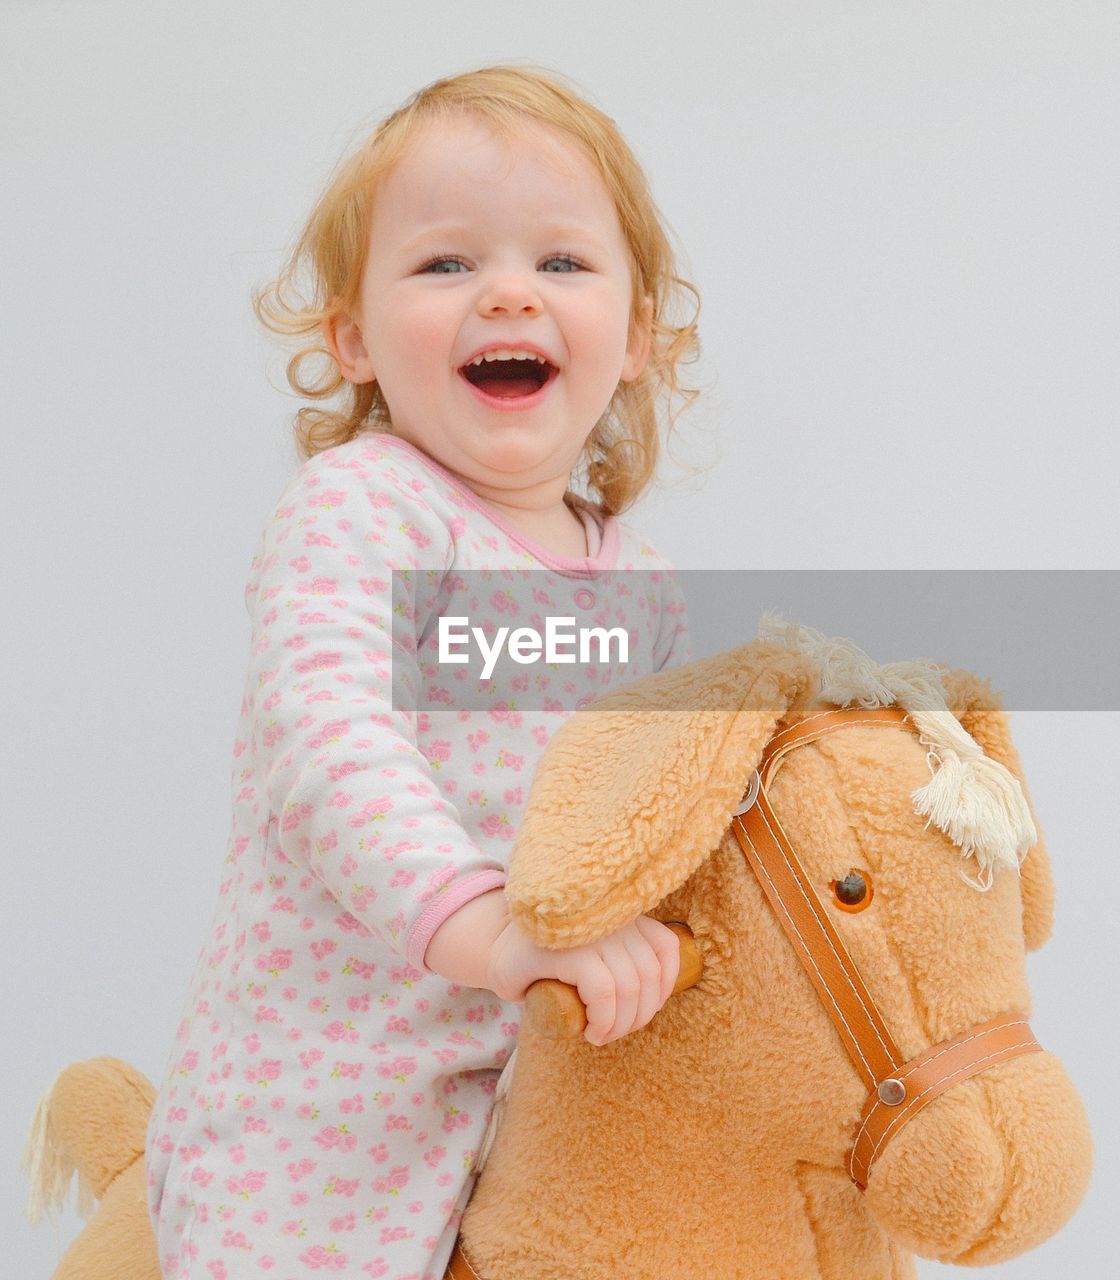 Portrait of smiling girl sitting on stuffed toy against white background